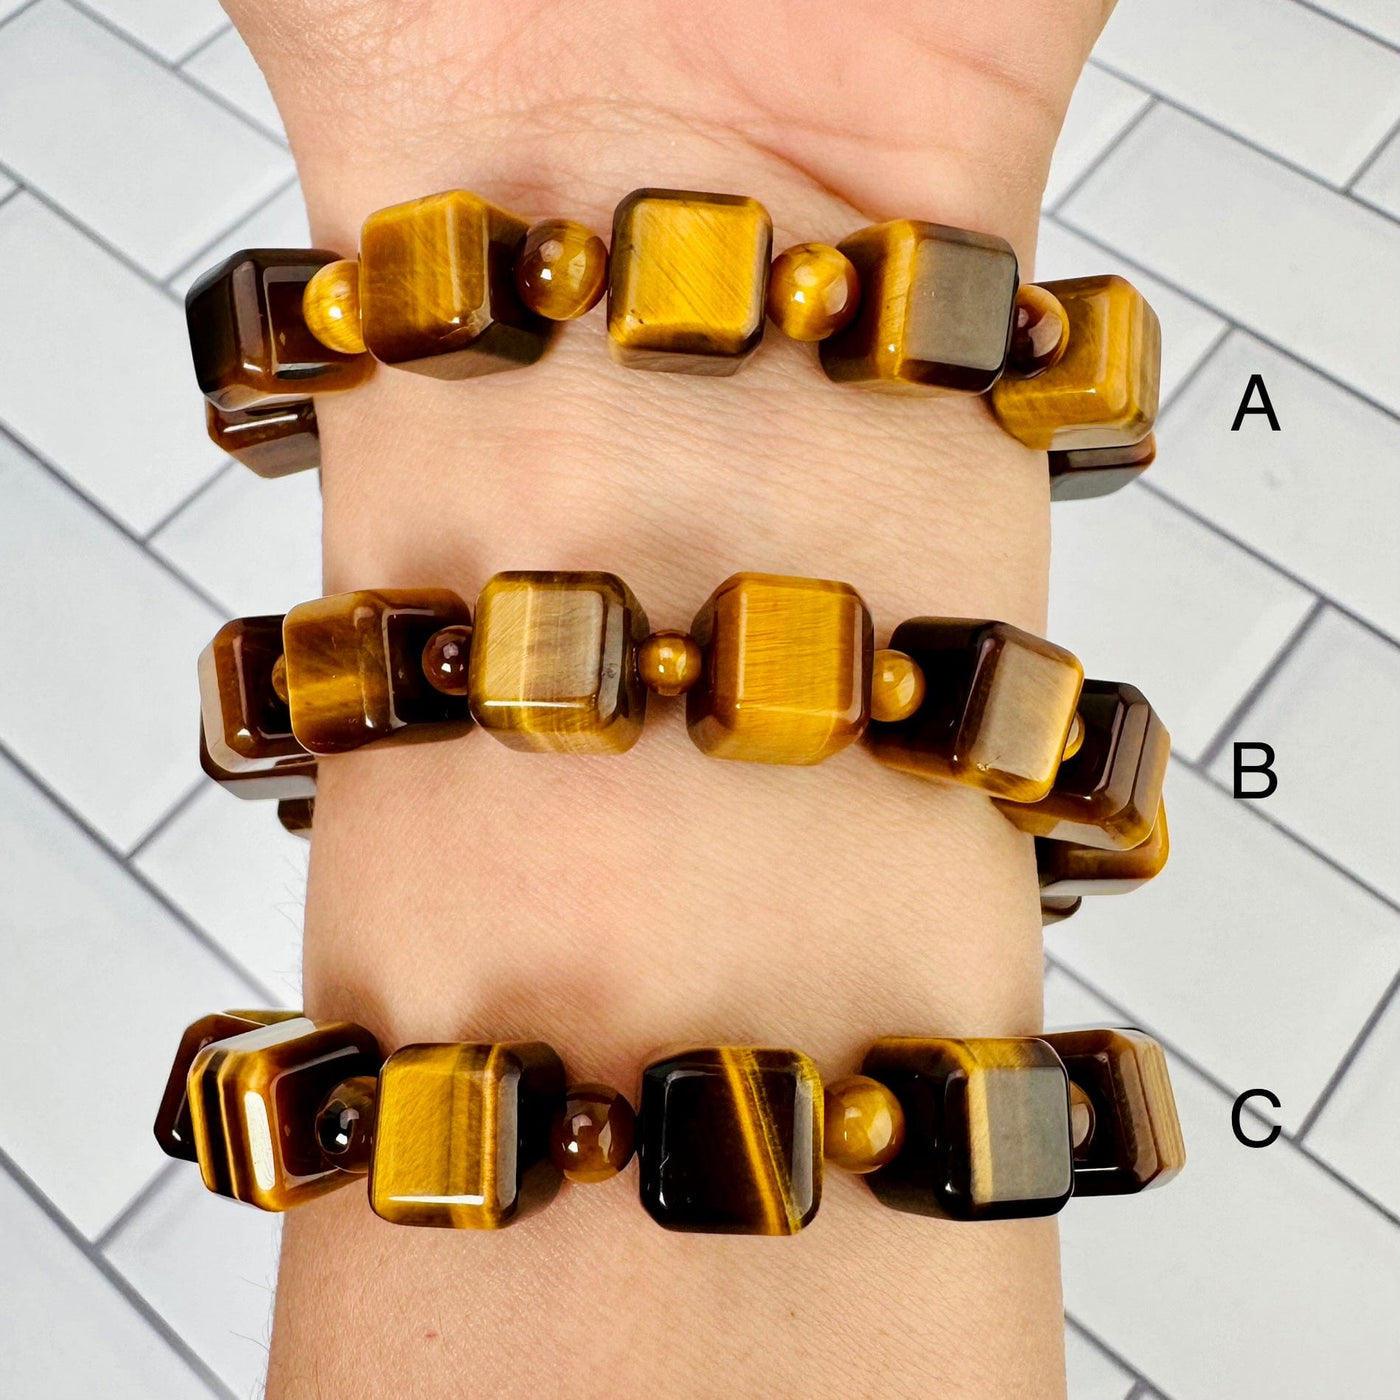 3 different sizes of tigers eye bracelets displayed on woman's wrist, with respective letter next to each one.